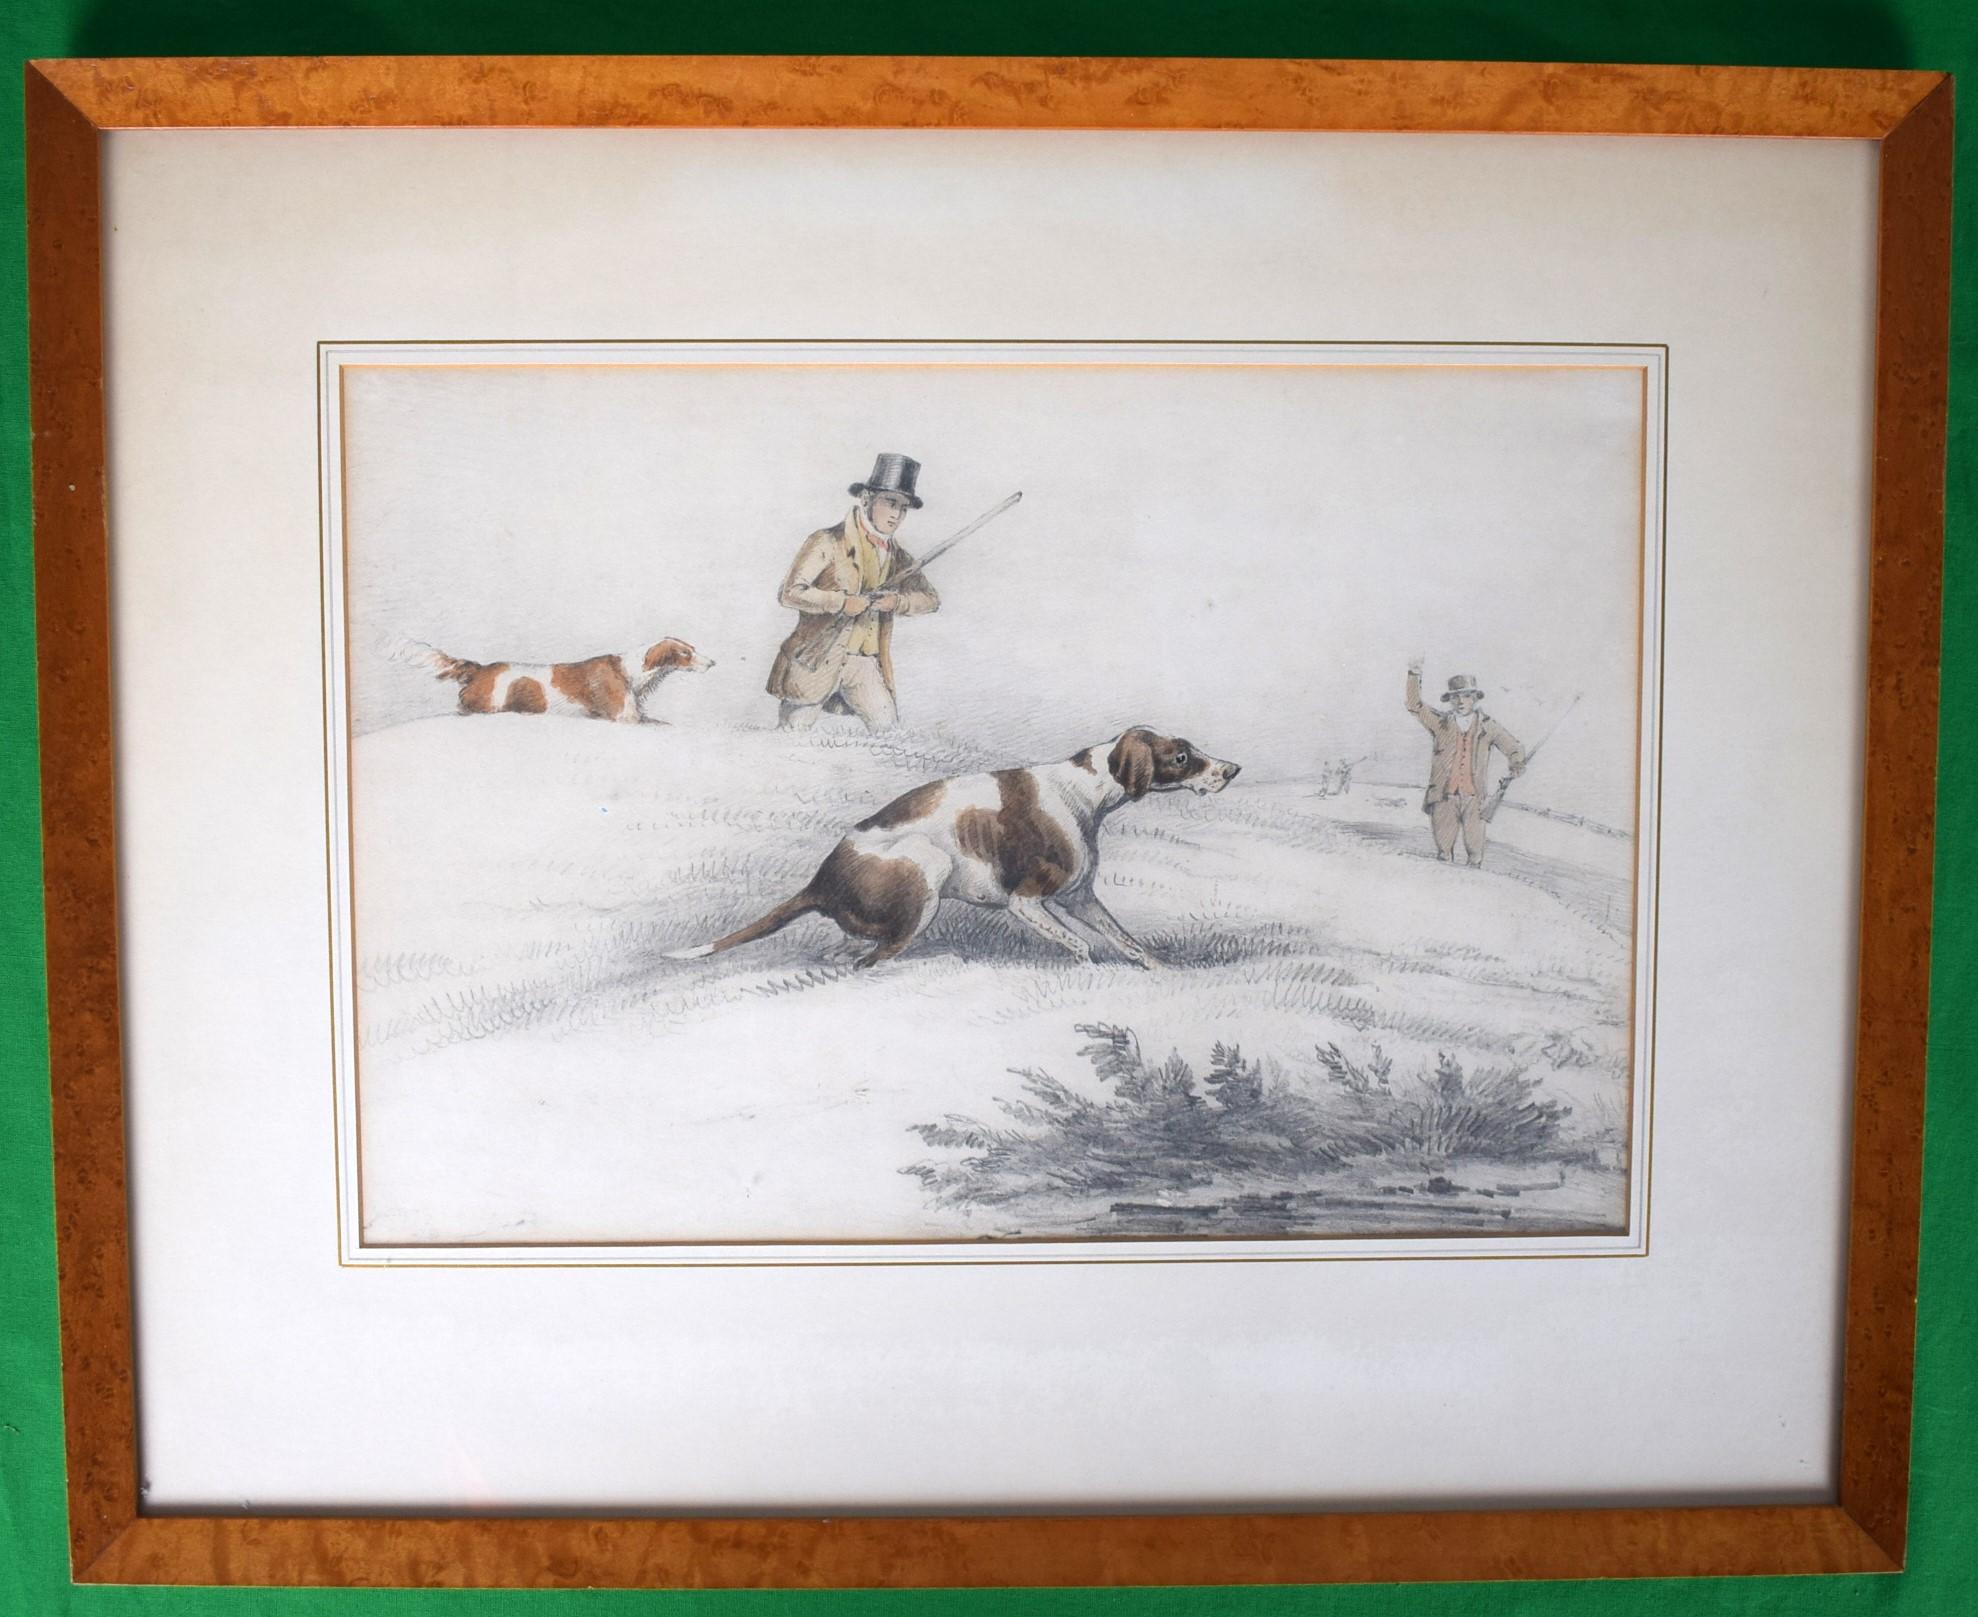 Art Sz: 9 7/8"H x 14 1/2"W

Frame Sz: 17 1/8"H x 21 1/8"W

Artist: Henry Alken

Provenance: 
The Sportsman's Gallery of Art and Books, Inc. 
7 East 55th Street New York 22, N.Y. 
(Label)